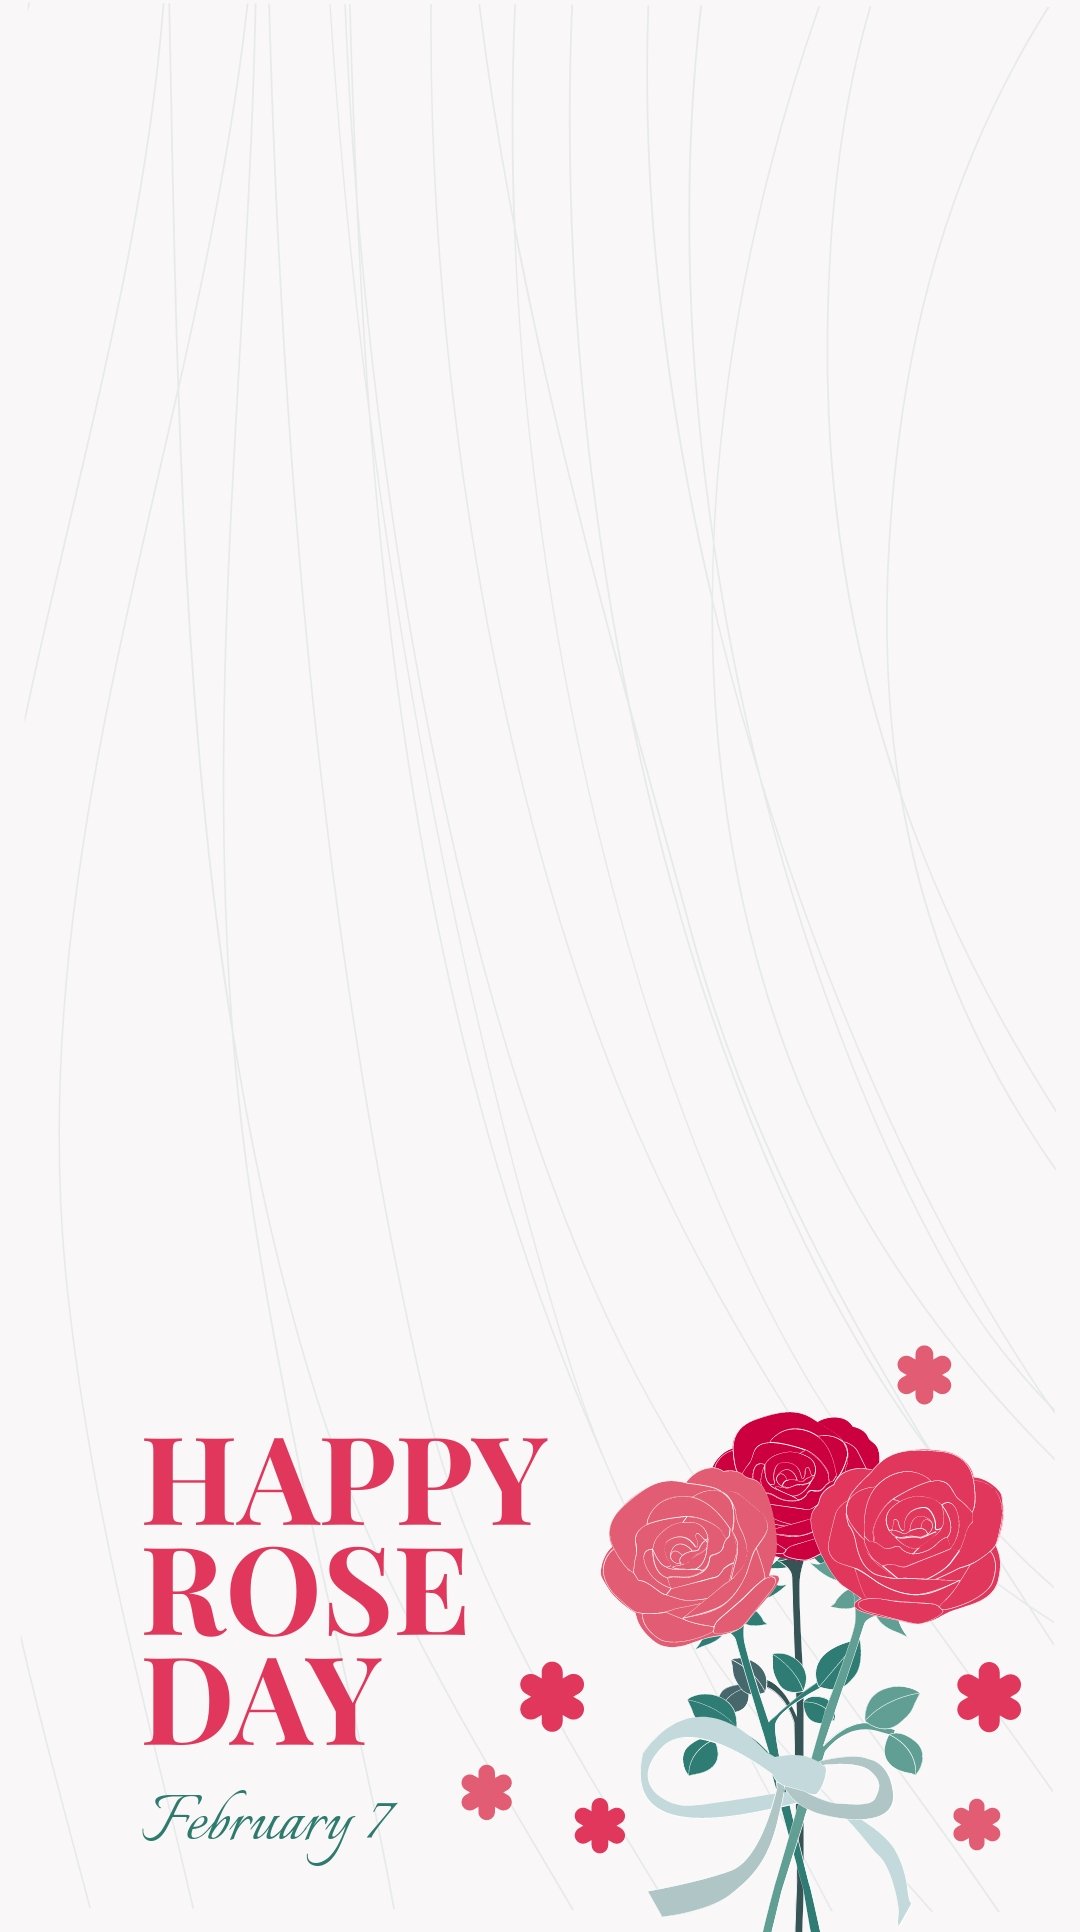 Happy Rose Day Snapchat Geofilter Template